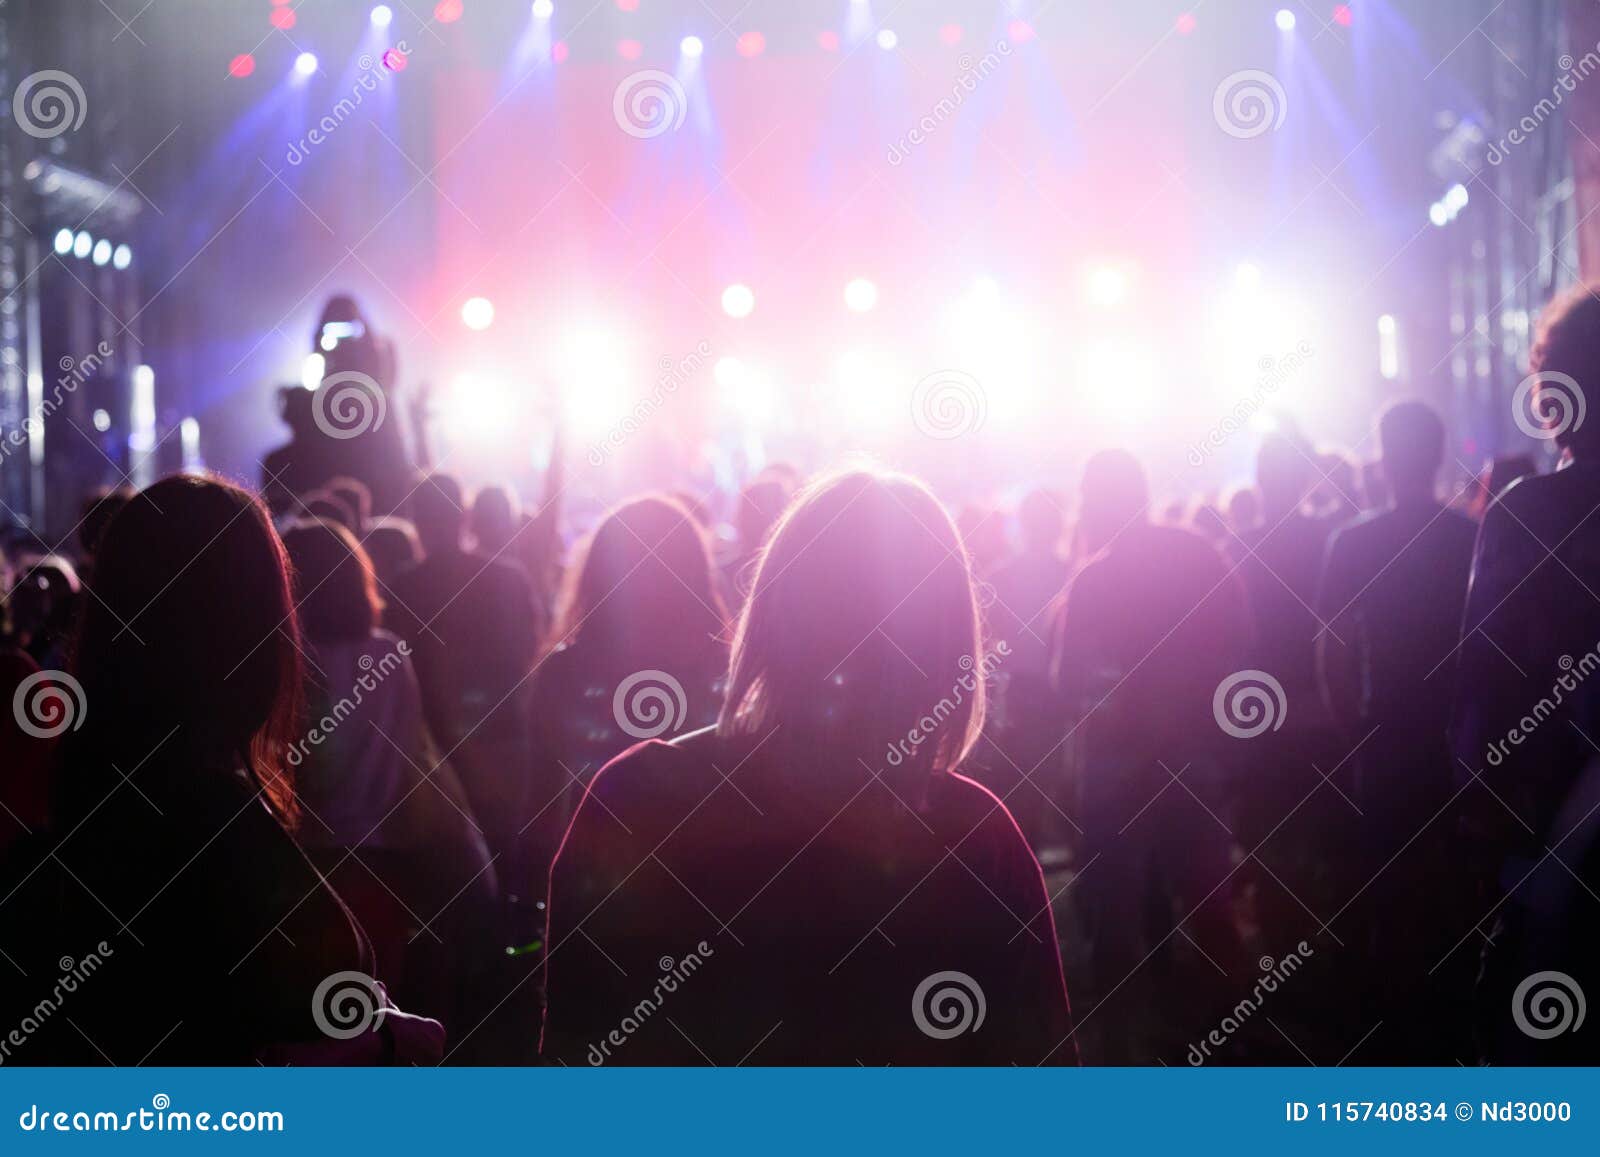 Picture of Party People on Music Festival Stock Photo - Image of ...